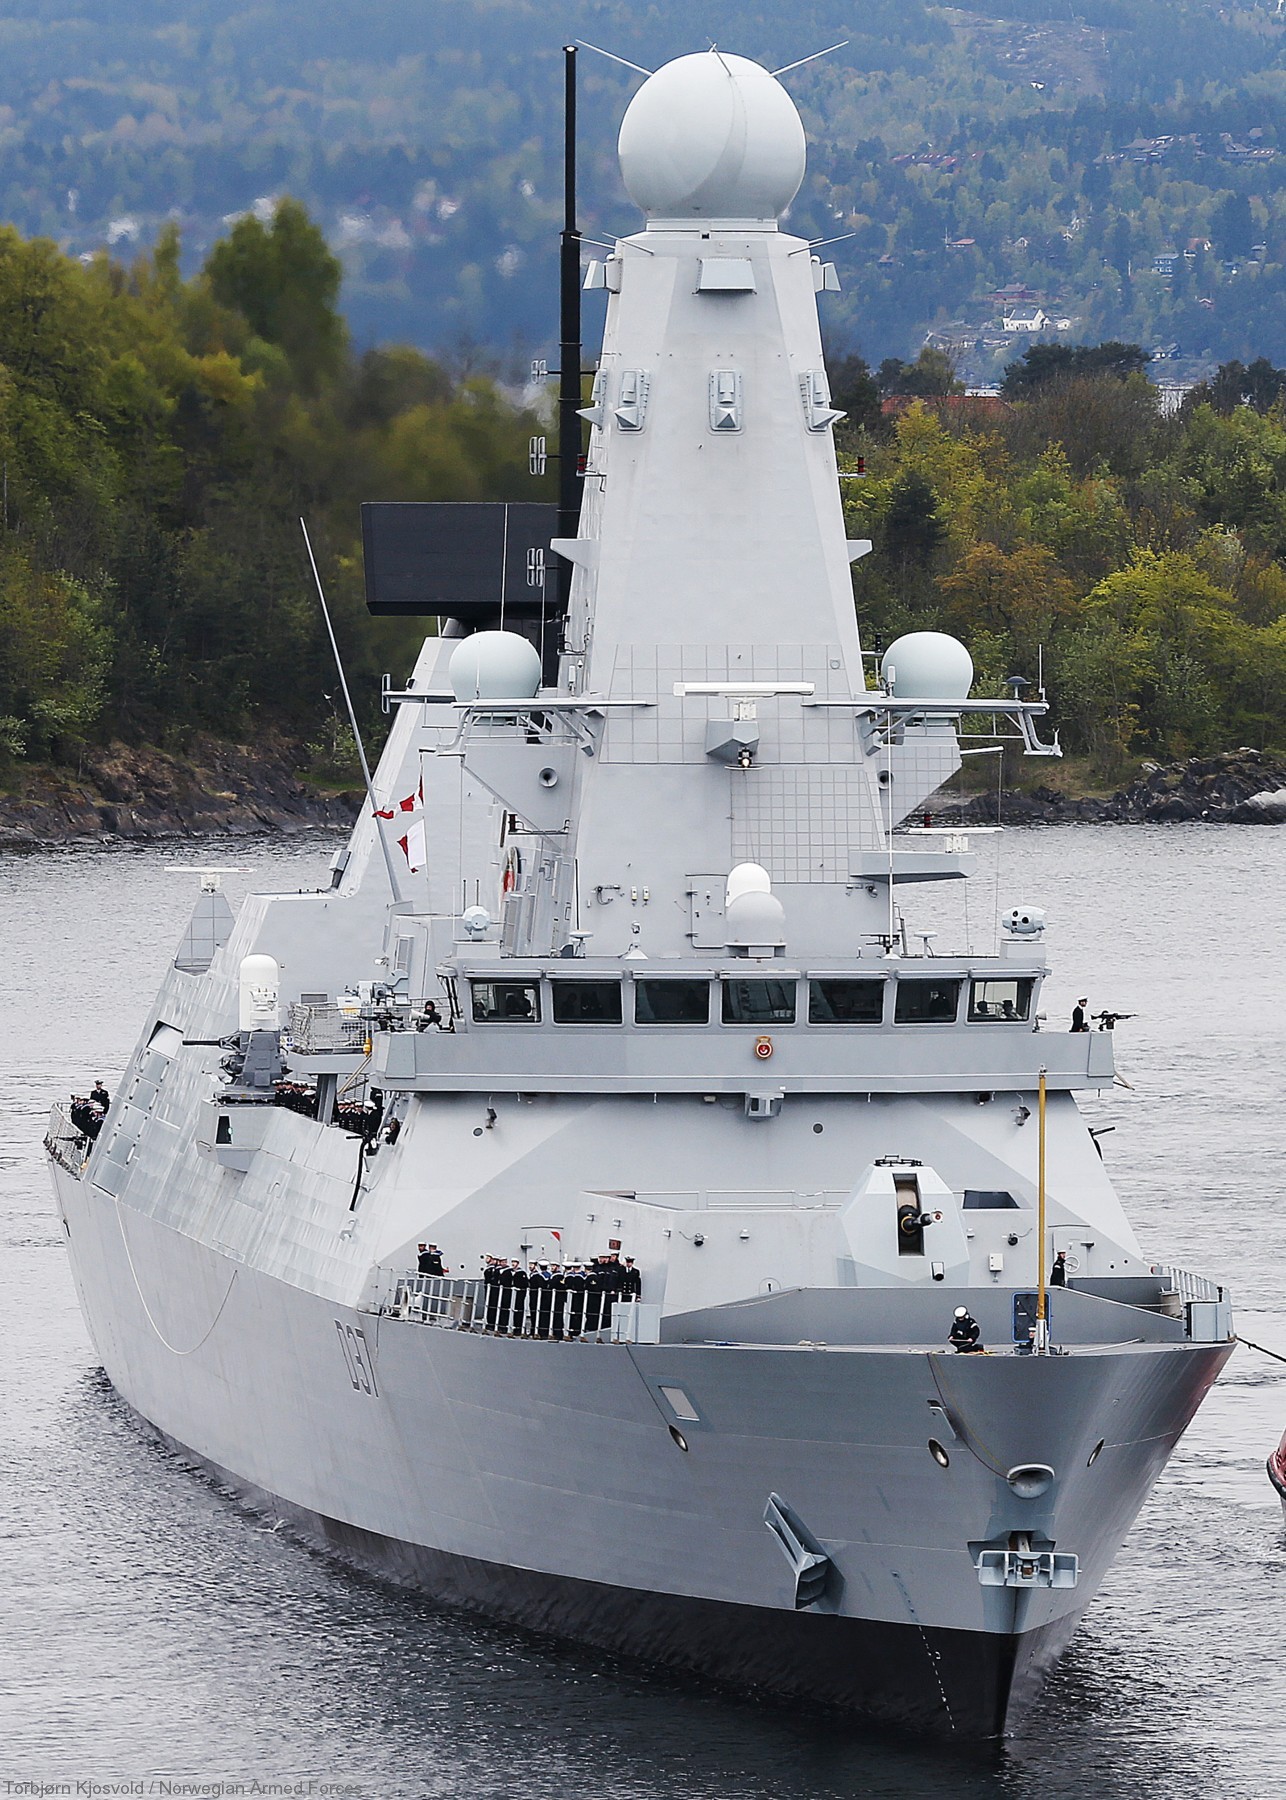 hms duncan d-37 type 45 daring class guided missile destroyer ddg royal navy sea viper paams 40